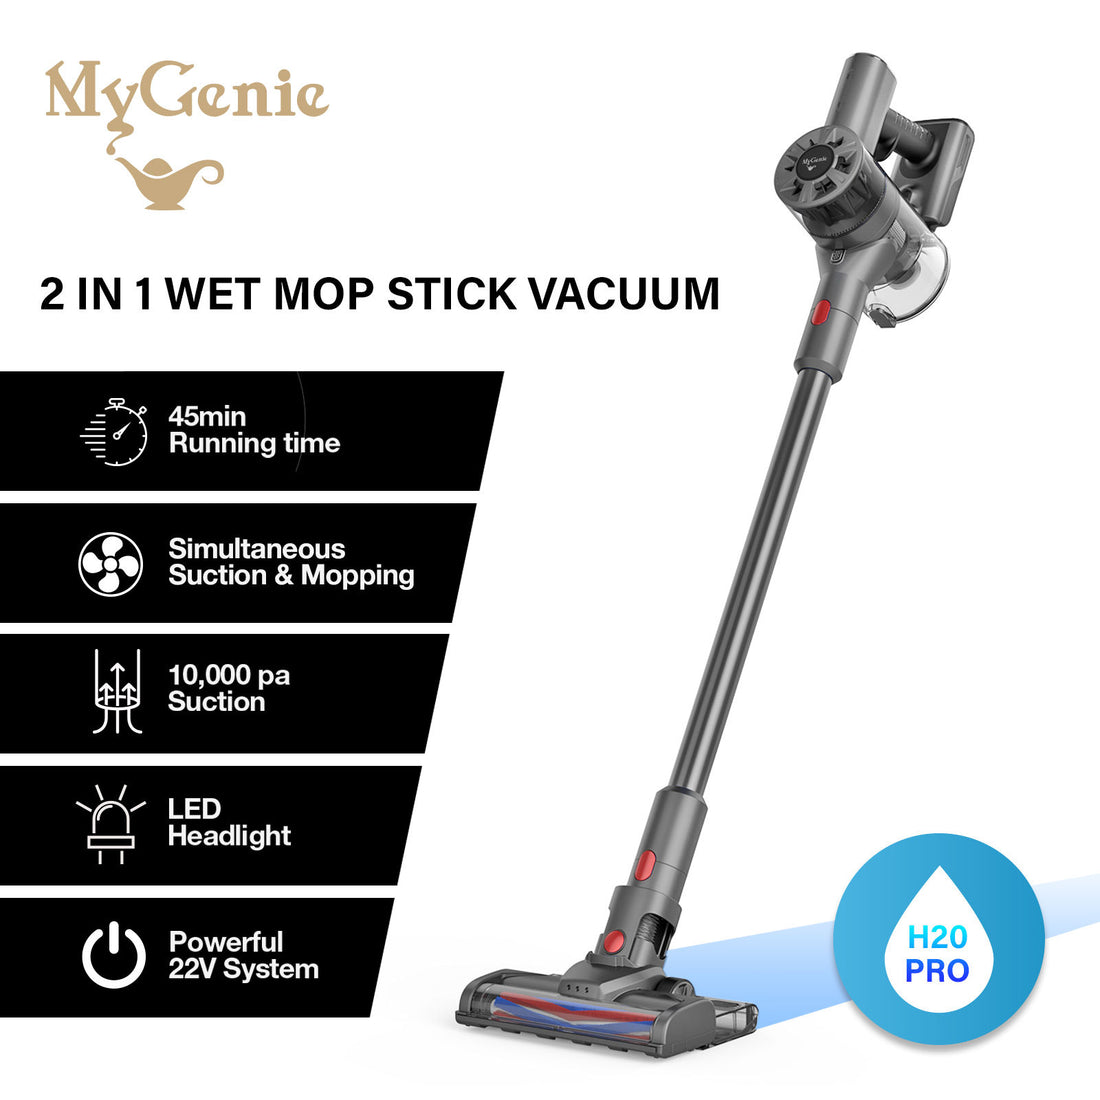 MyGenie H20 PRO Wet Mop 2-IN-1 Cordless Stick Vacuum Cleaner Handheld Recharge-Small Home Appliances-PEROZ Accessories